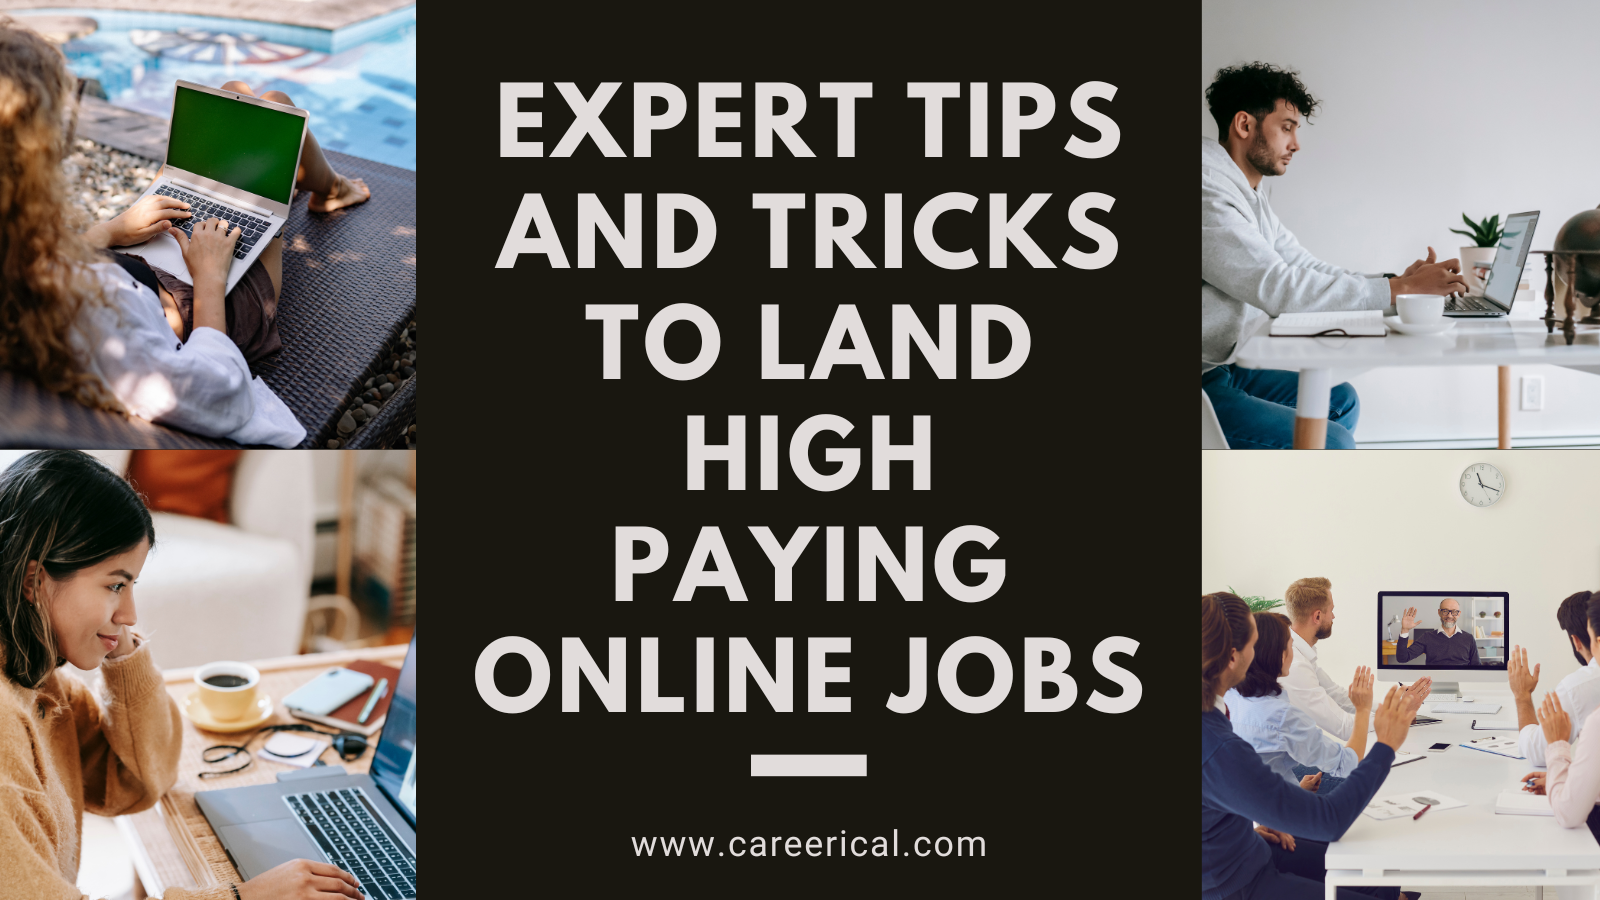 Expert Tips and Tricks to Land High Paying Online Jobs